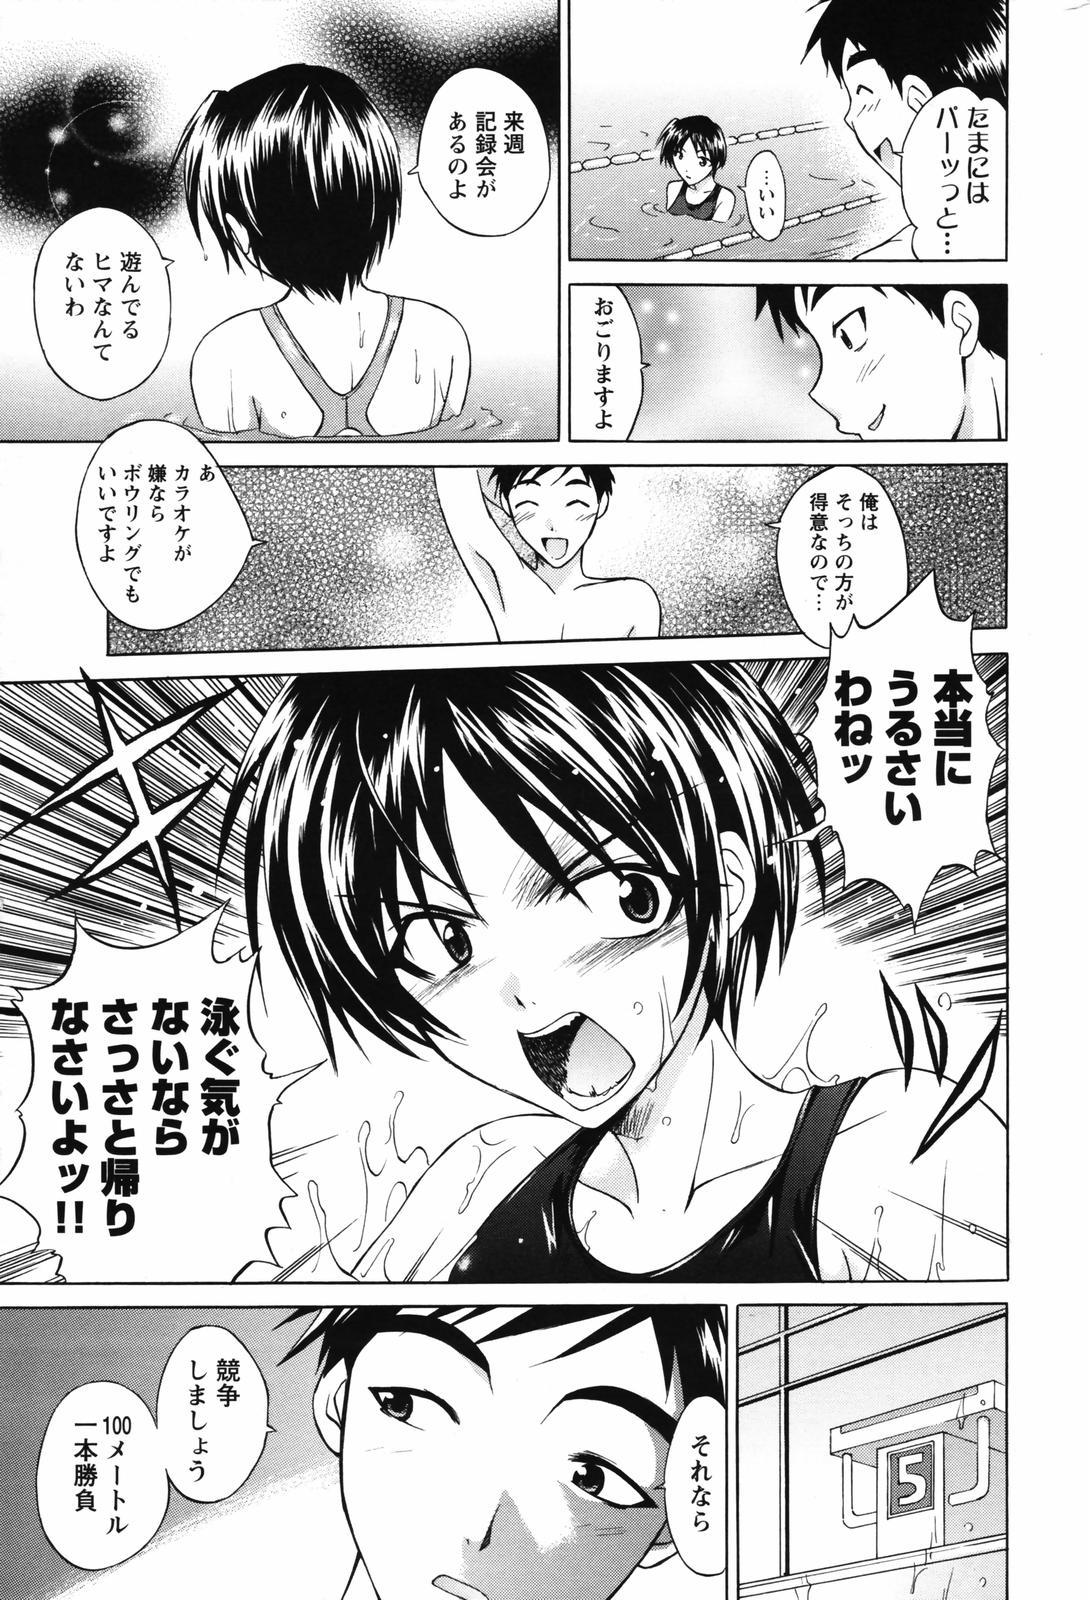 Men's Young Special IKAZUCHI 2007-03 Vol. 01 226